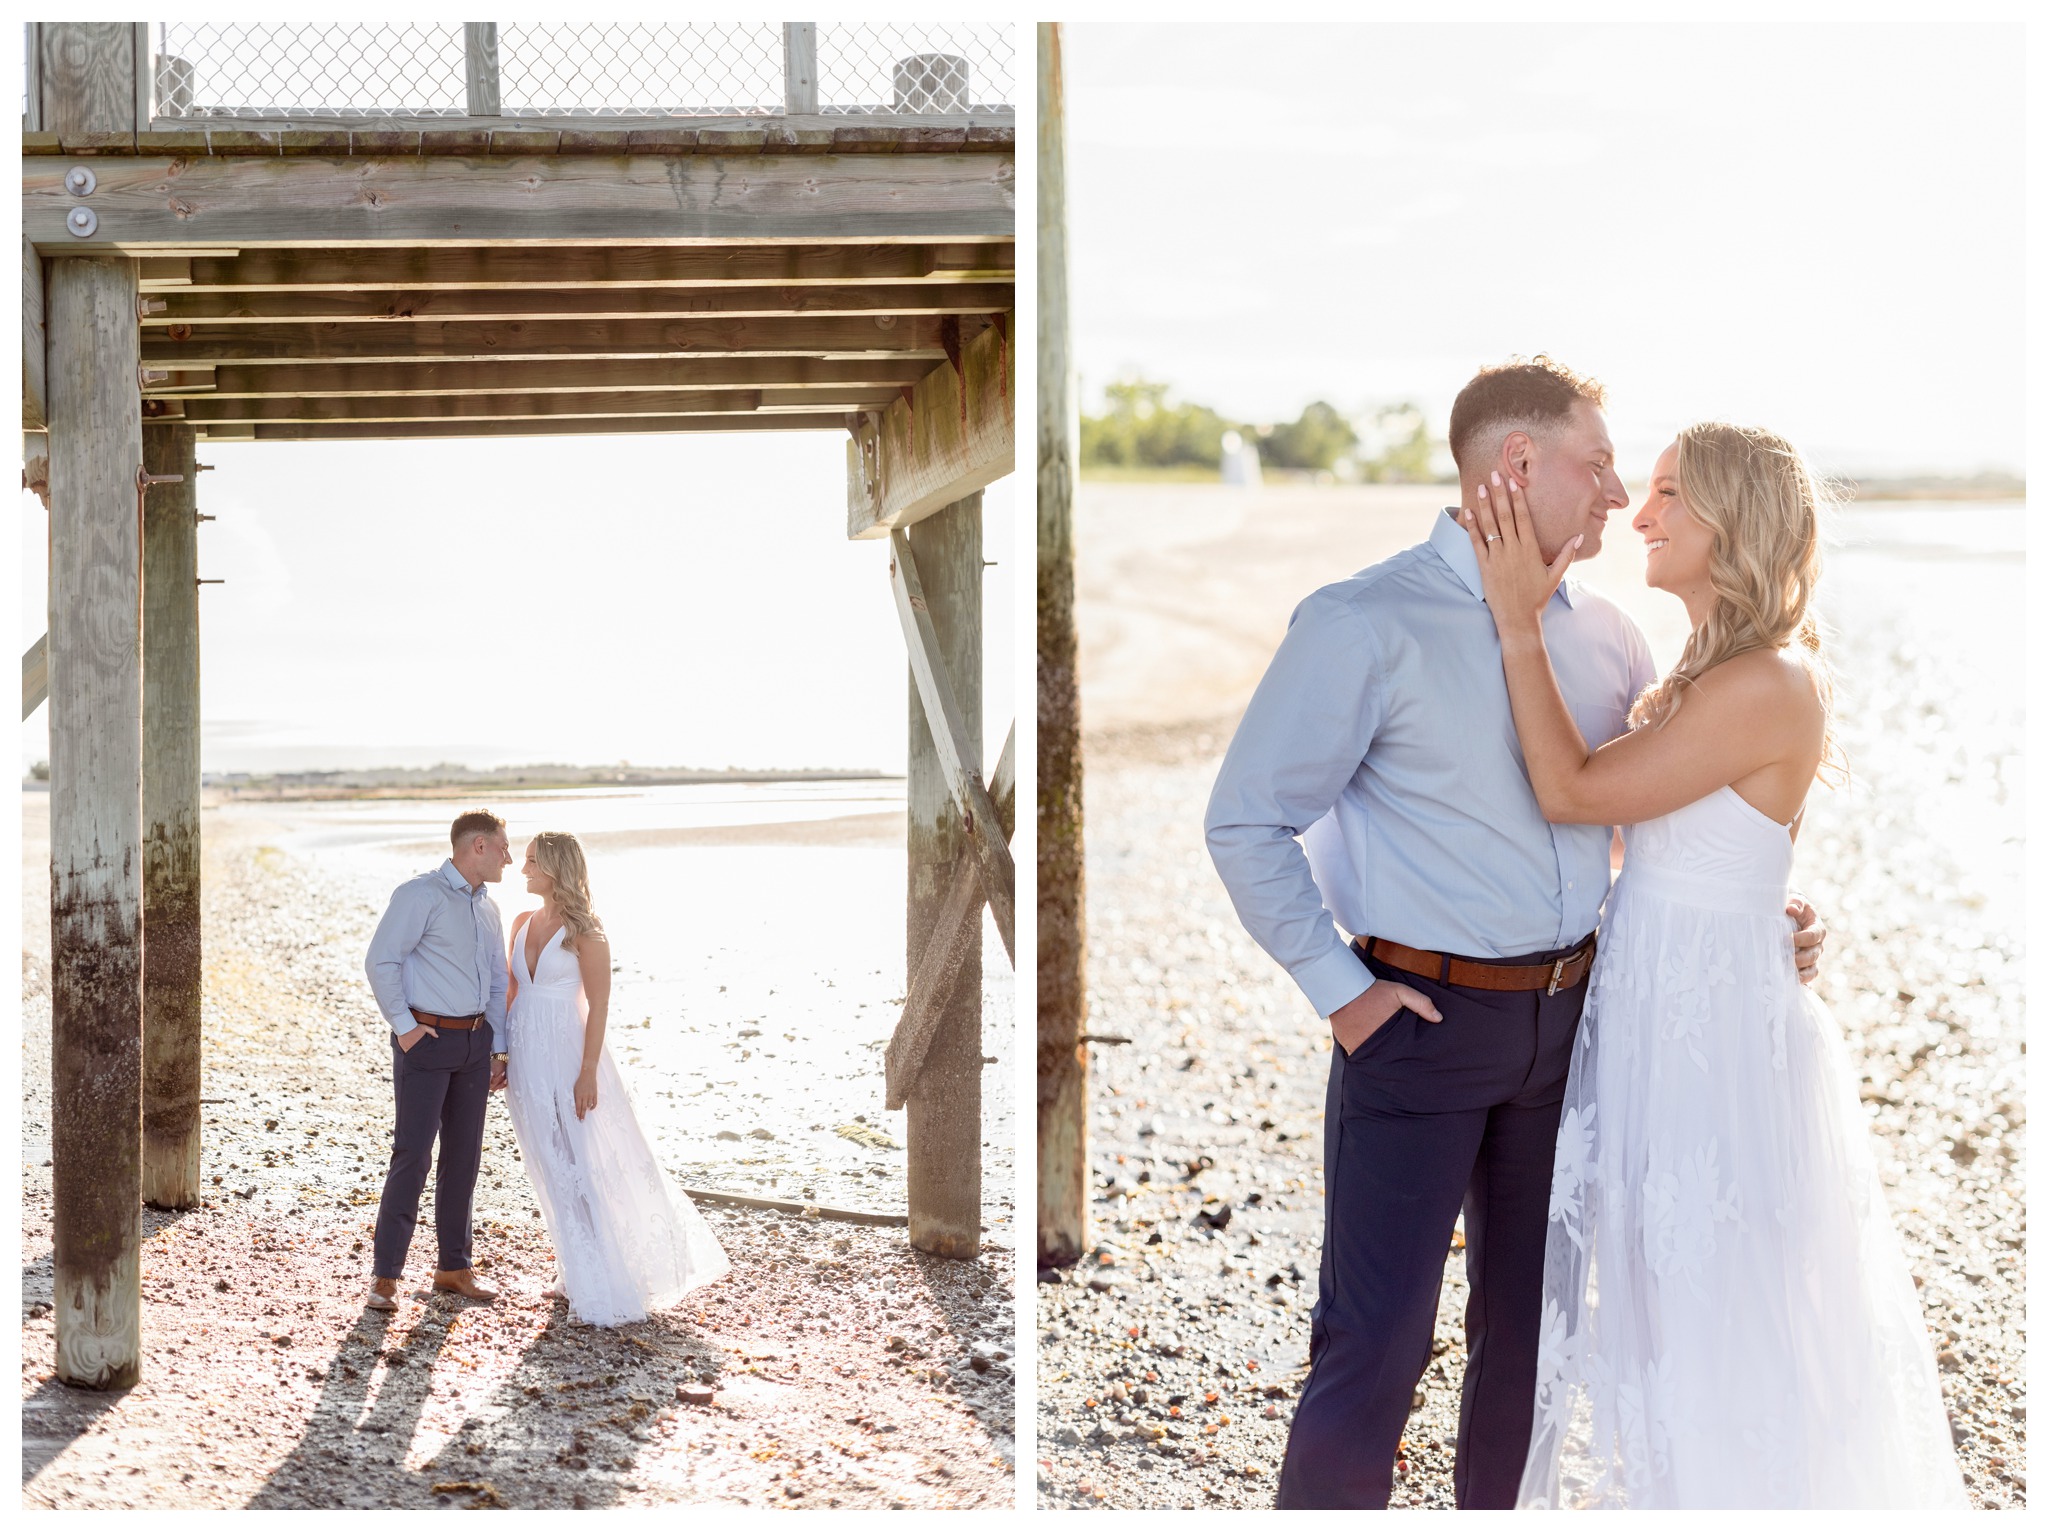 walnut beach engagement session in milford ct at silver sands beach under the pier